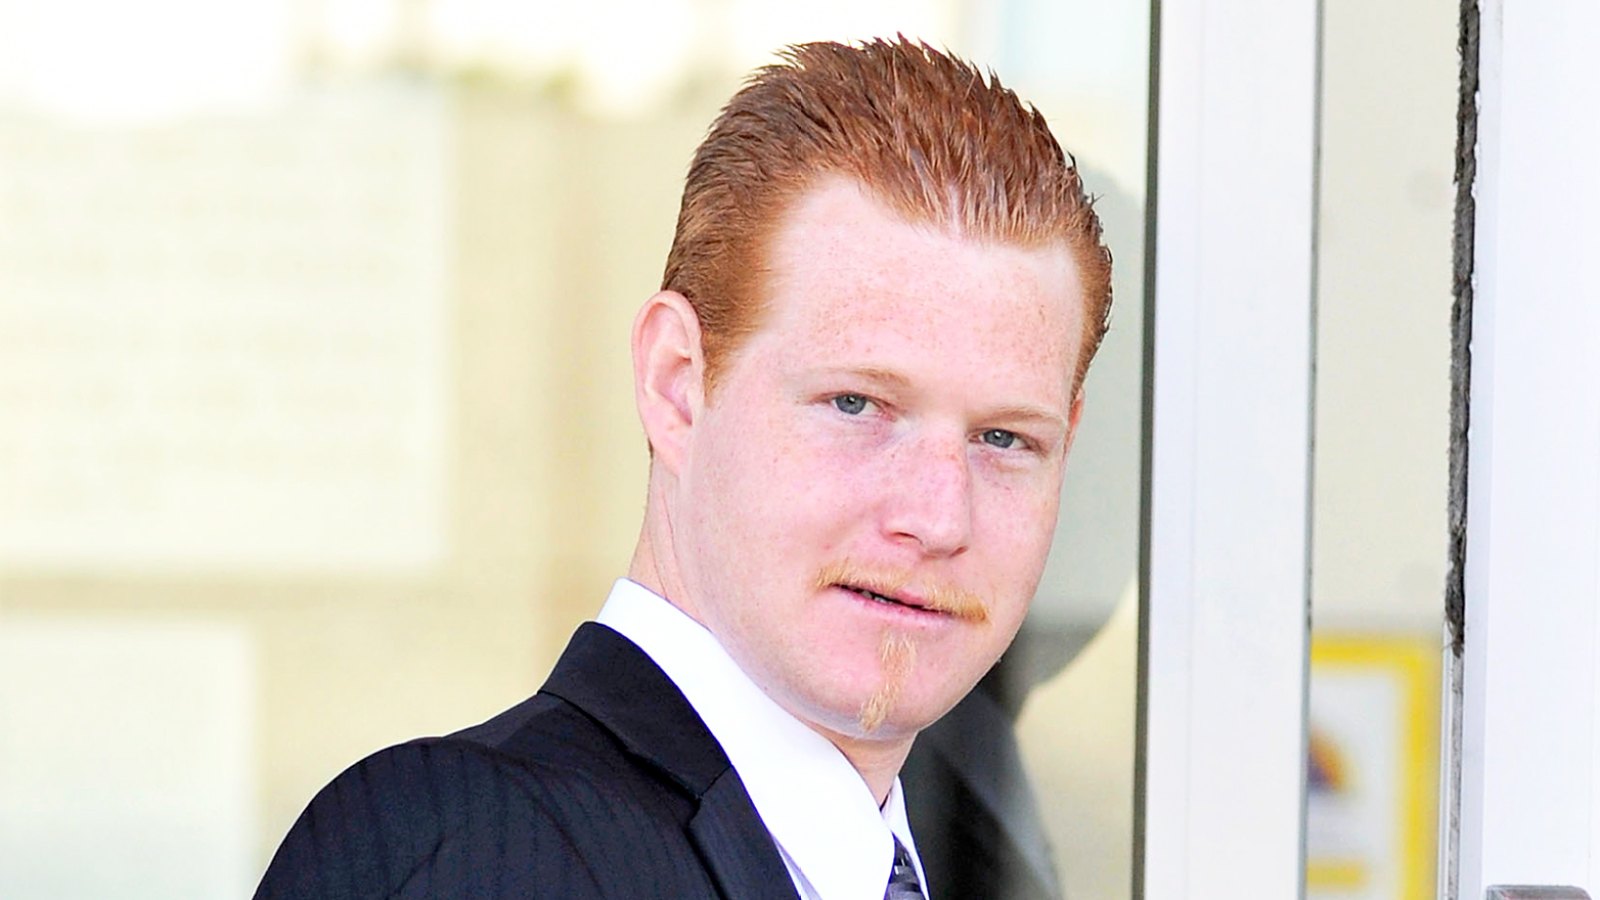 Redmond O'Neal arrives at LAX Courthouse on October 9, 2012 in Los Angeles, California.